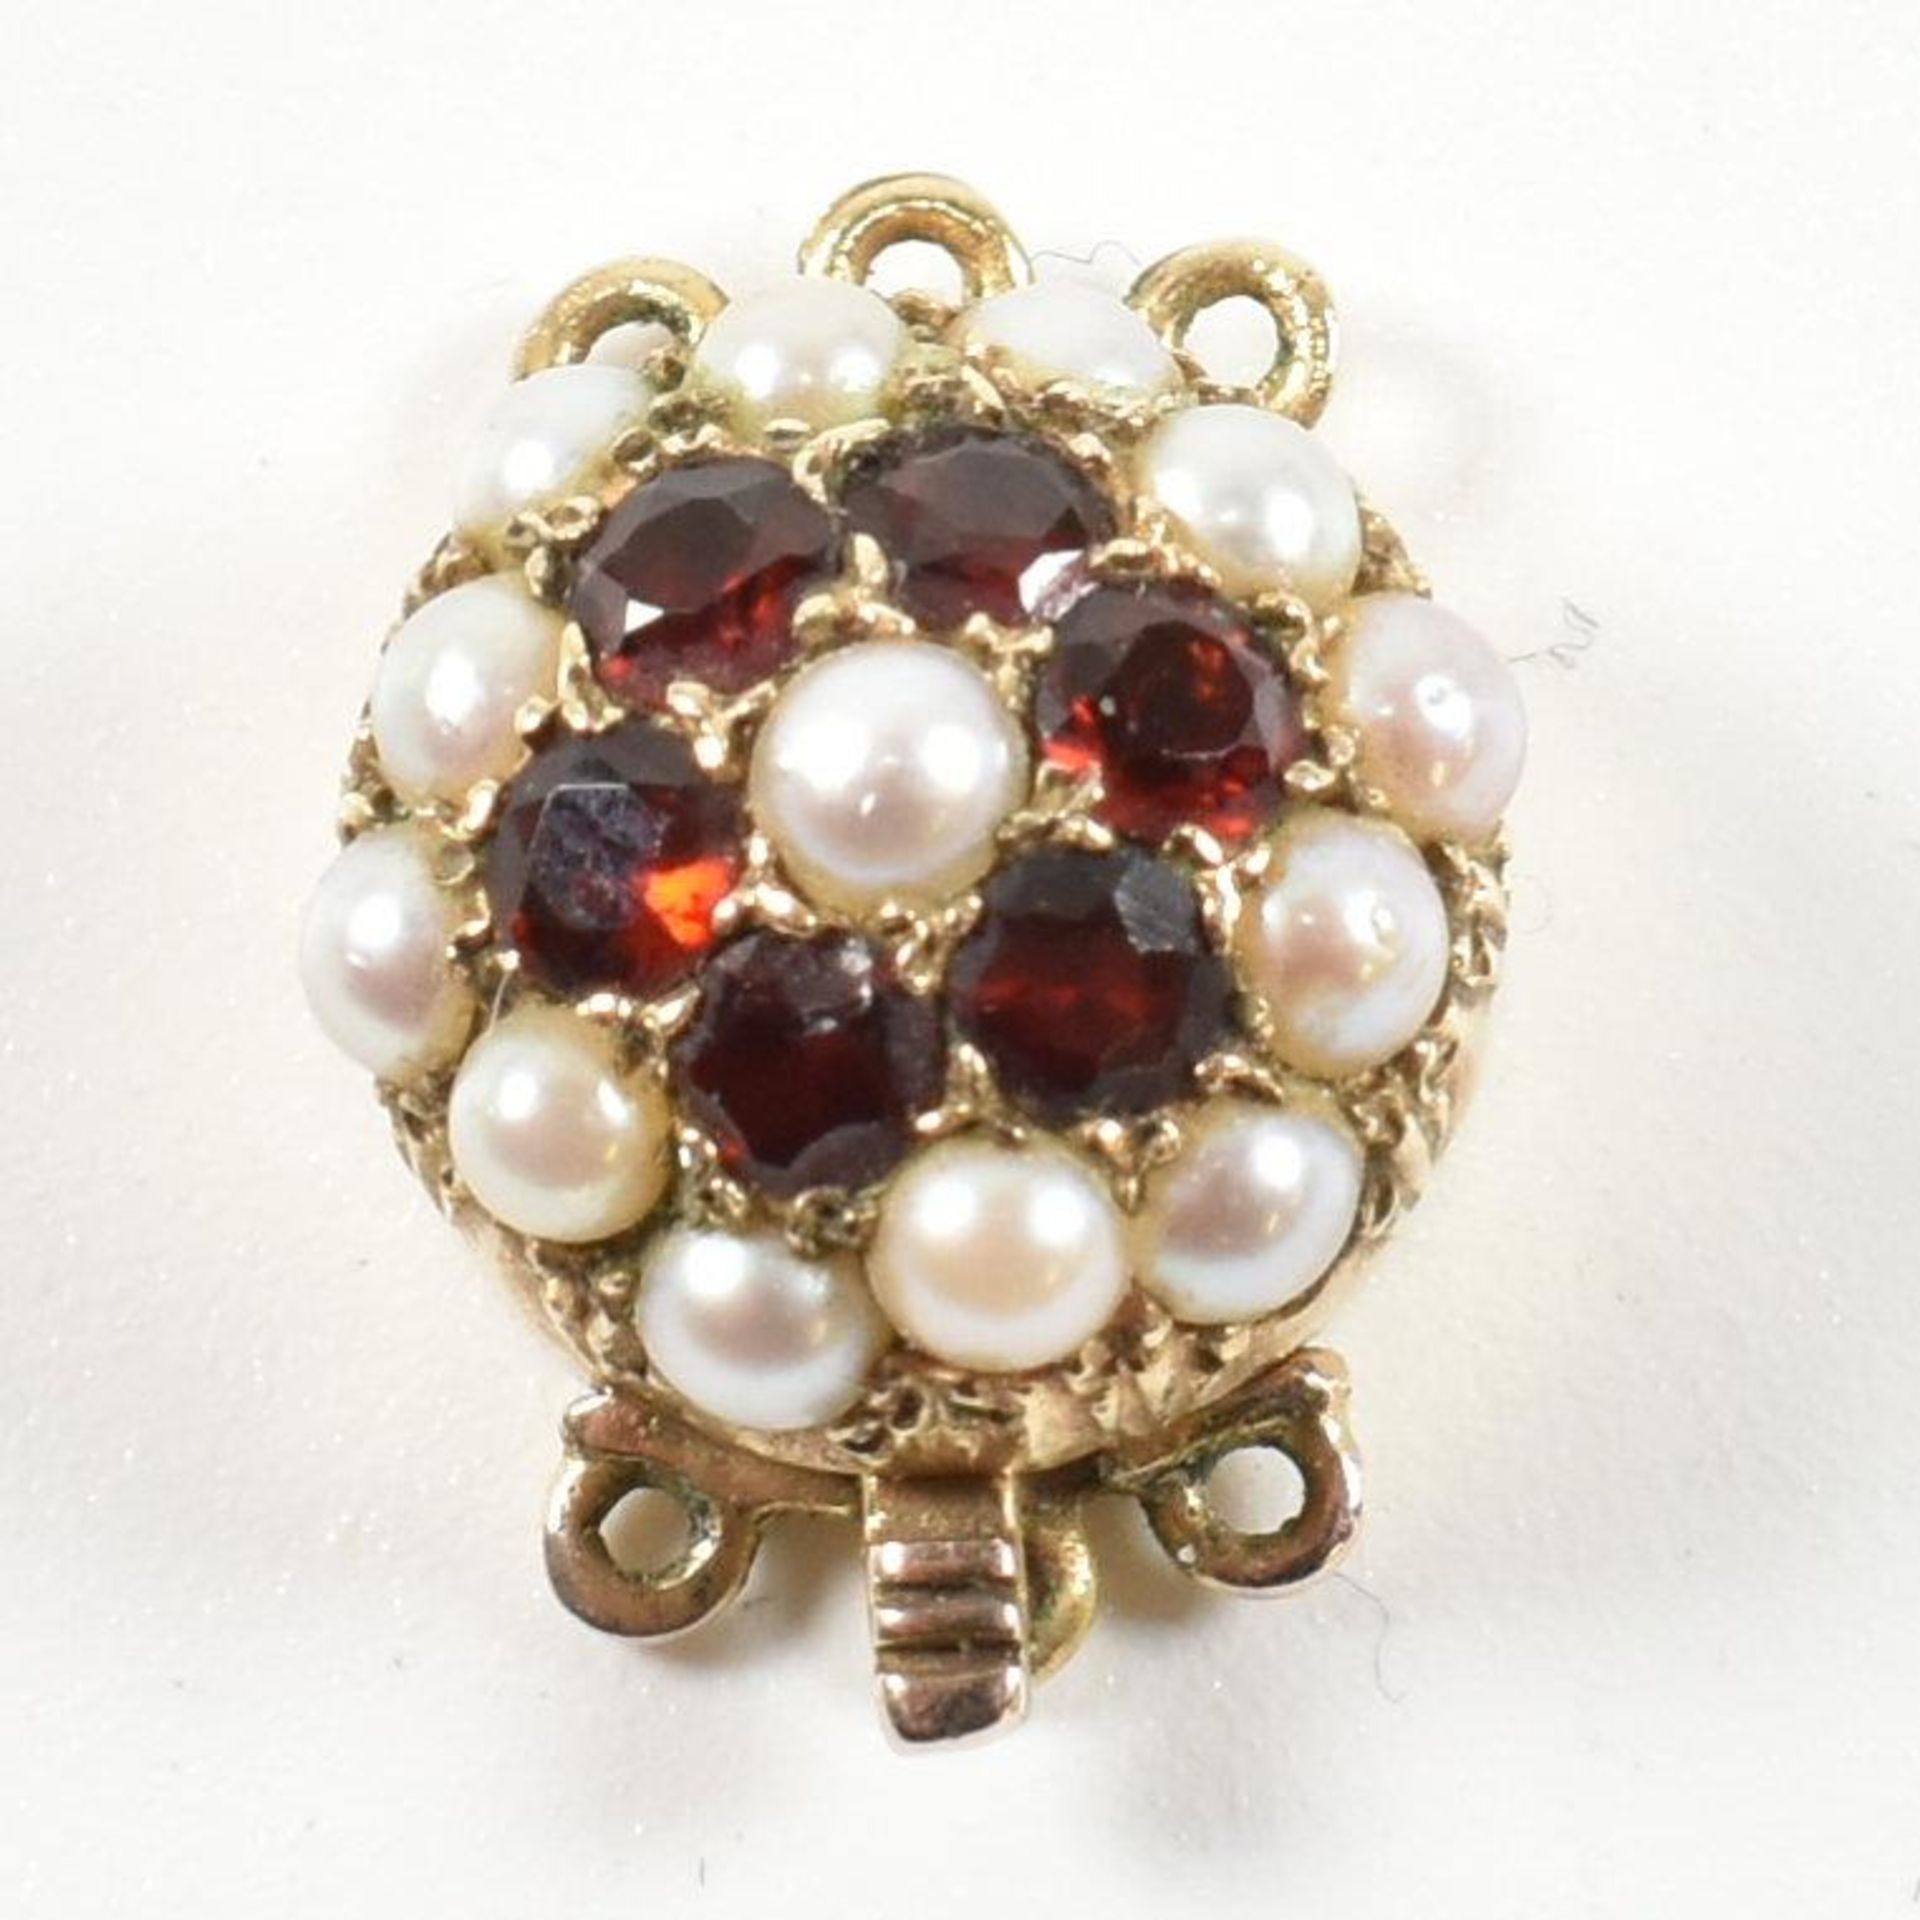 HALLMARKED 9CT GOLD PEARL & GARNET CLUSTER NECKLACE BOX CLASP - Image 2 of 7